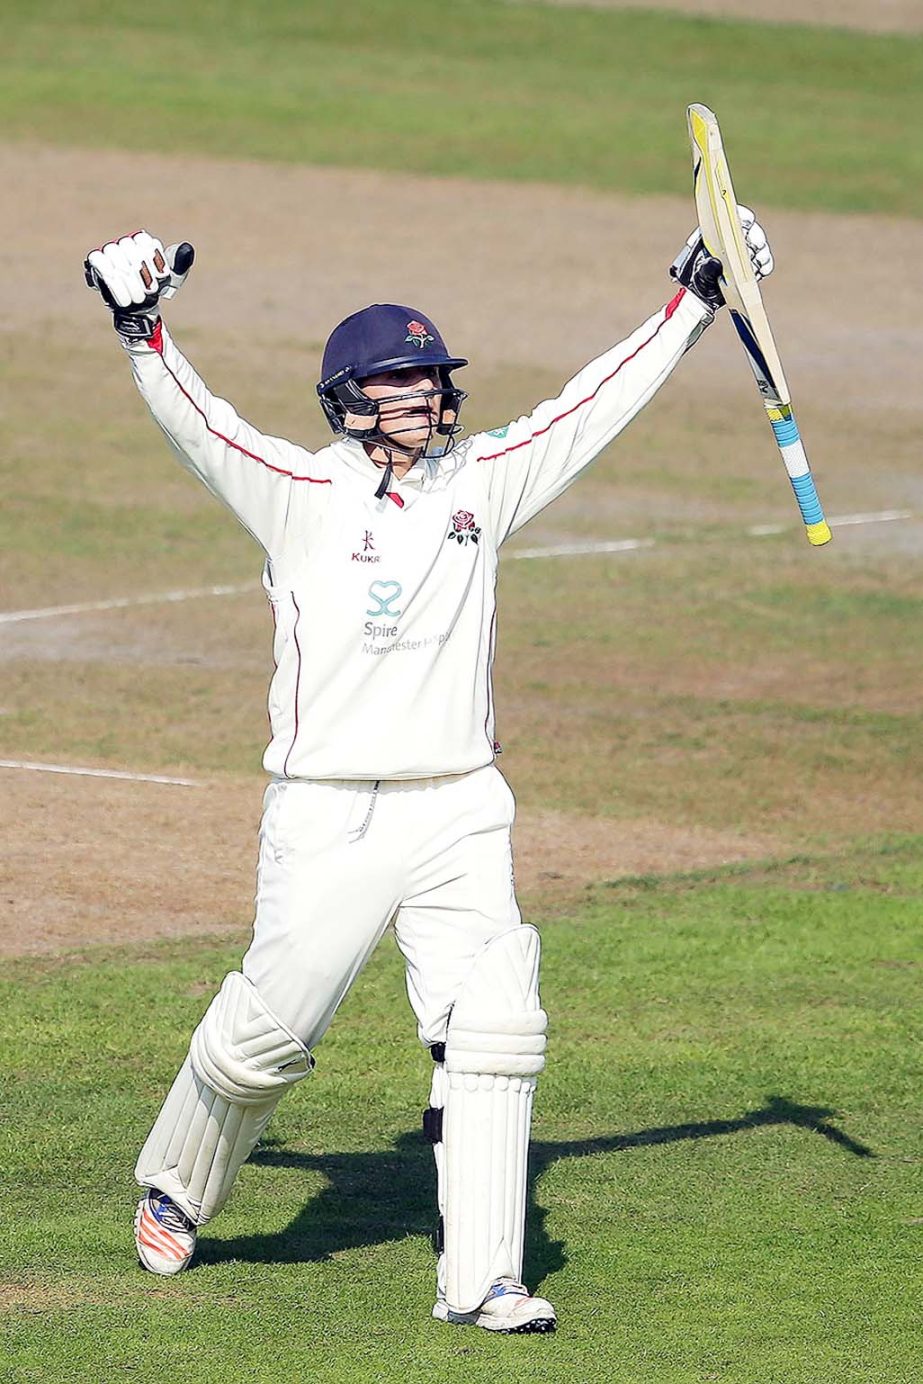 Rob Jones celebrates his maiden first-class hundred on the 3rd day of Division One in County Championship between Lancashire and Middlesex at Old Trafford on Wednesday.